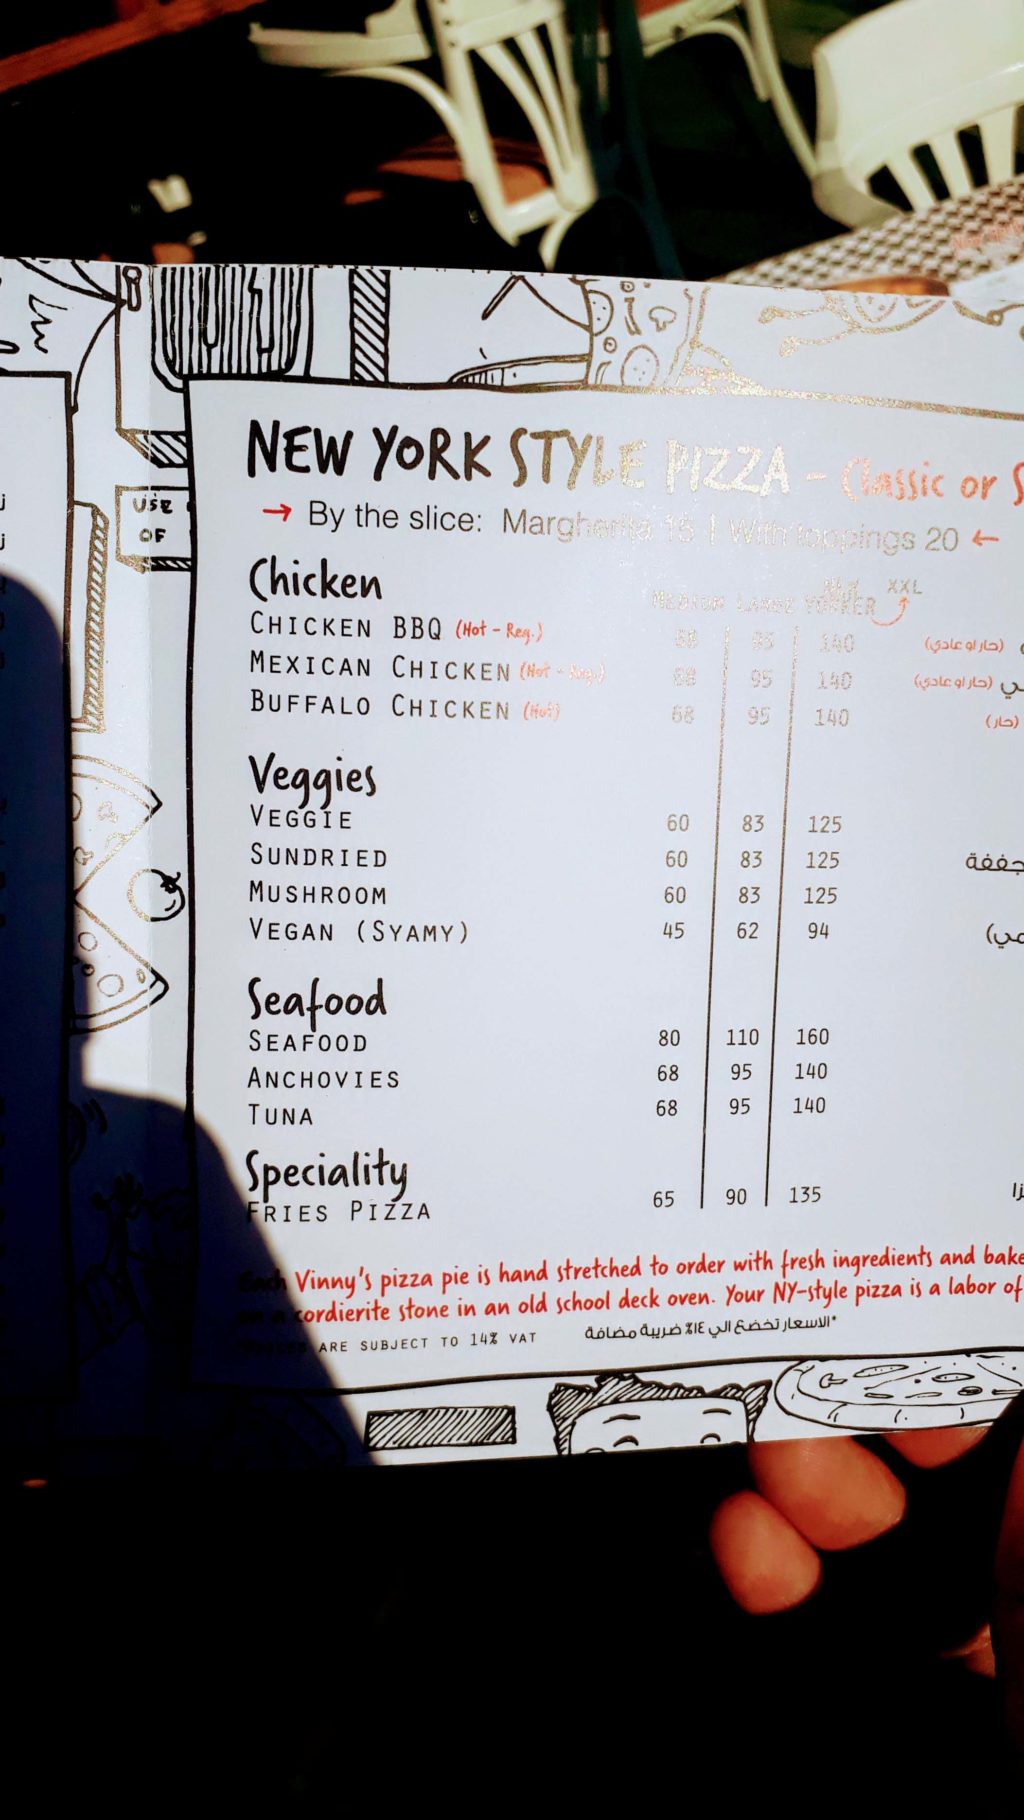 Vegan pizza also labeled as "syamy" in the menu 